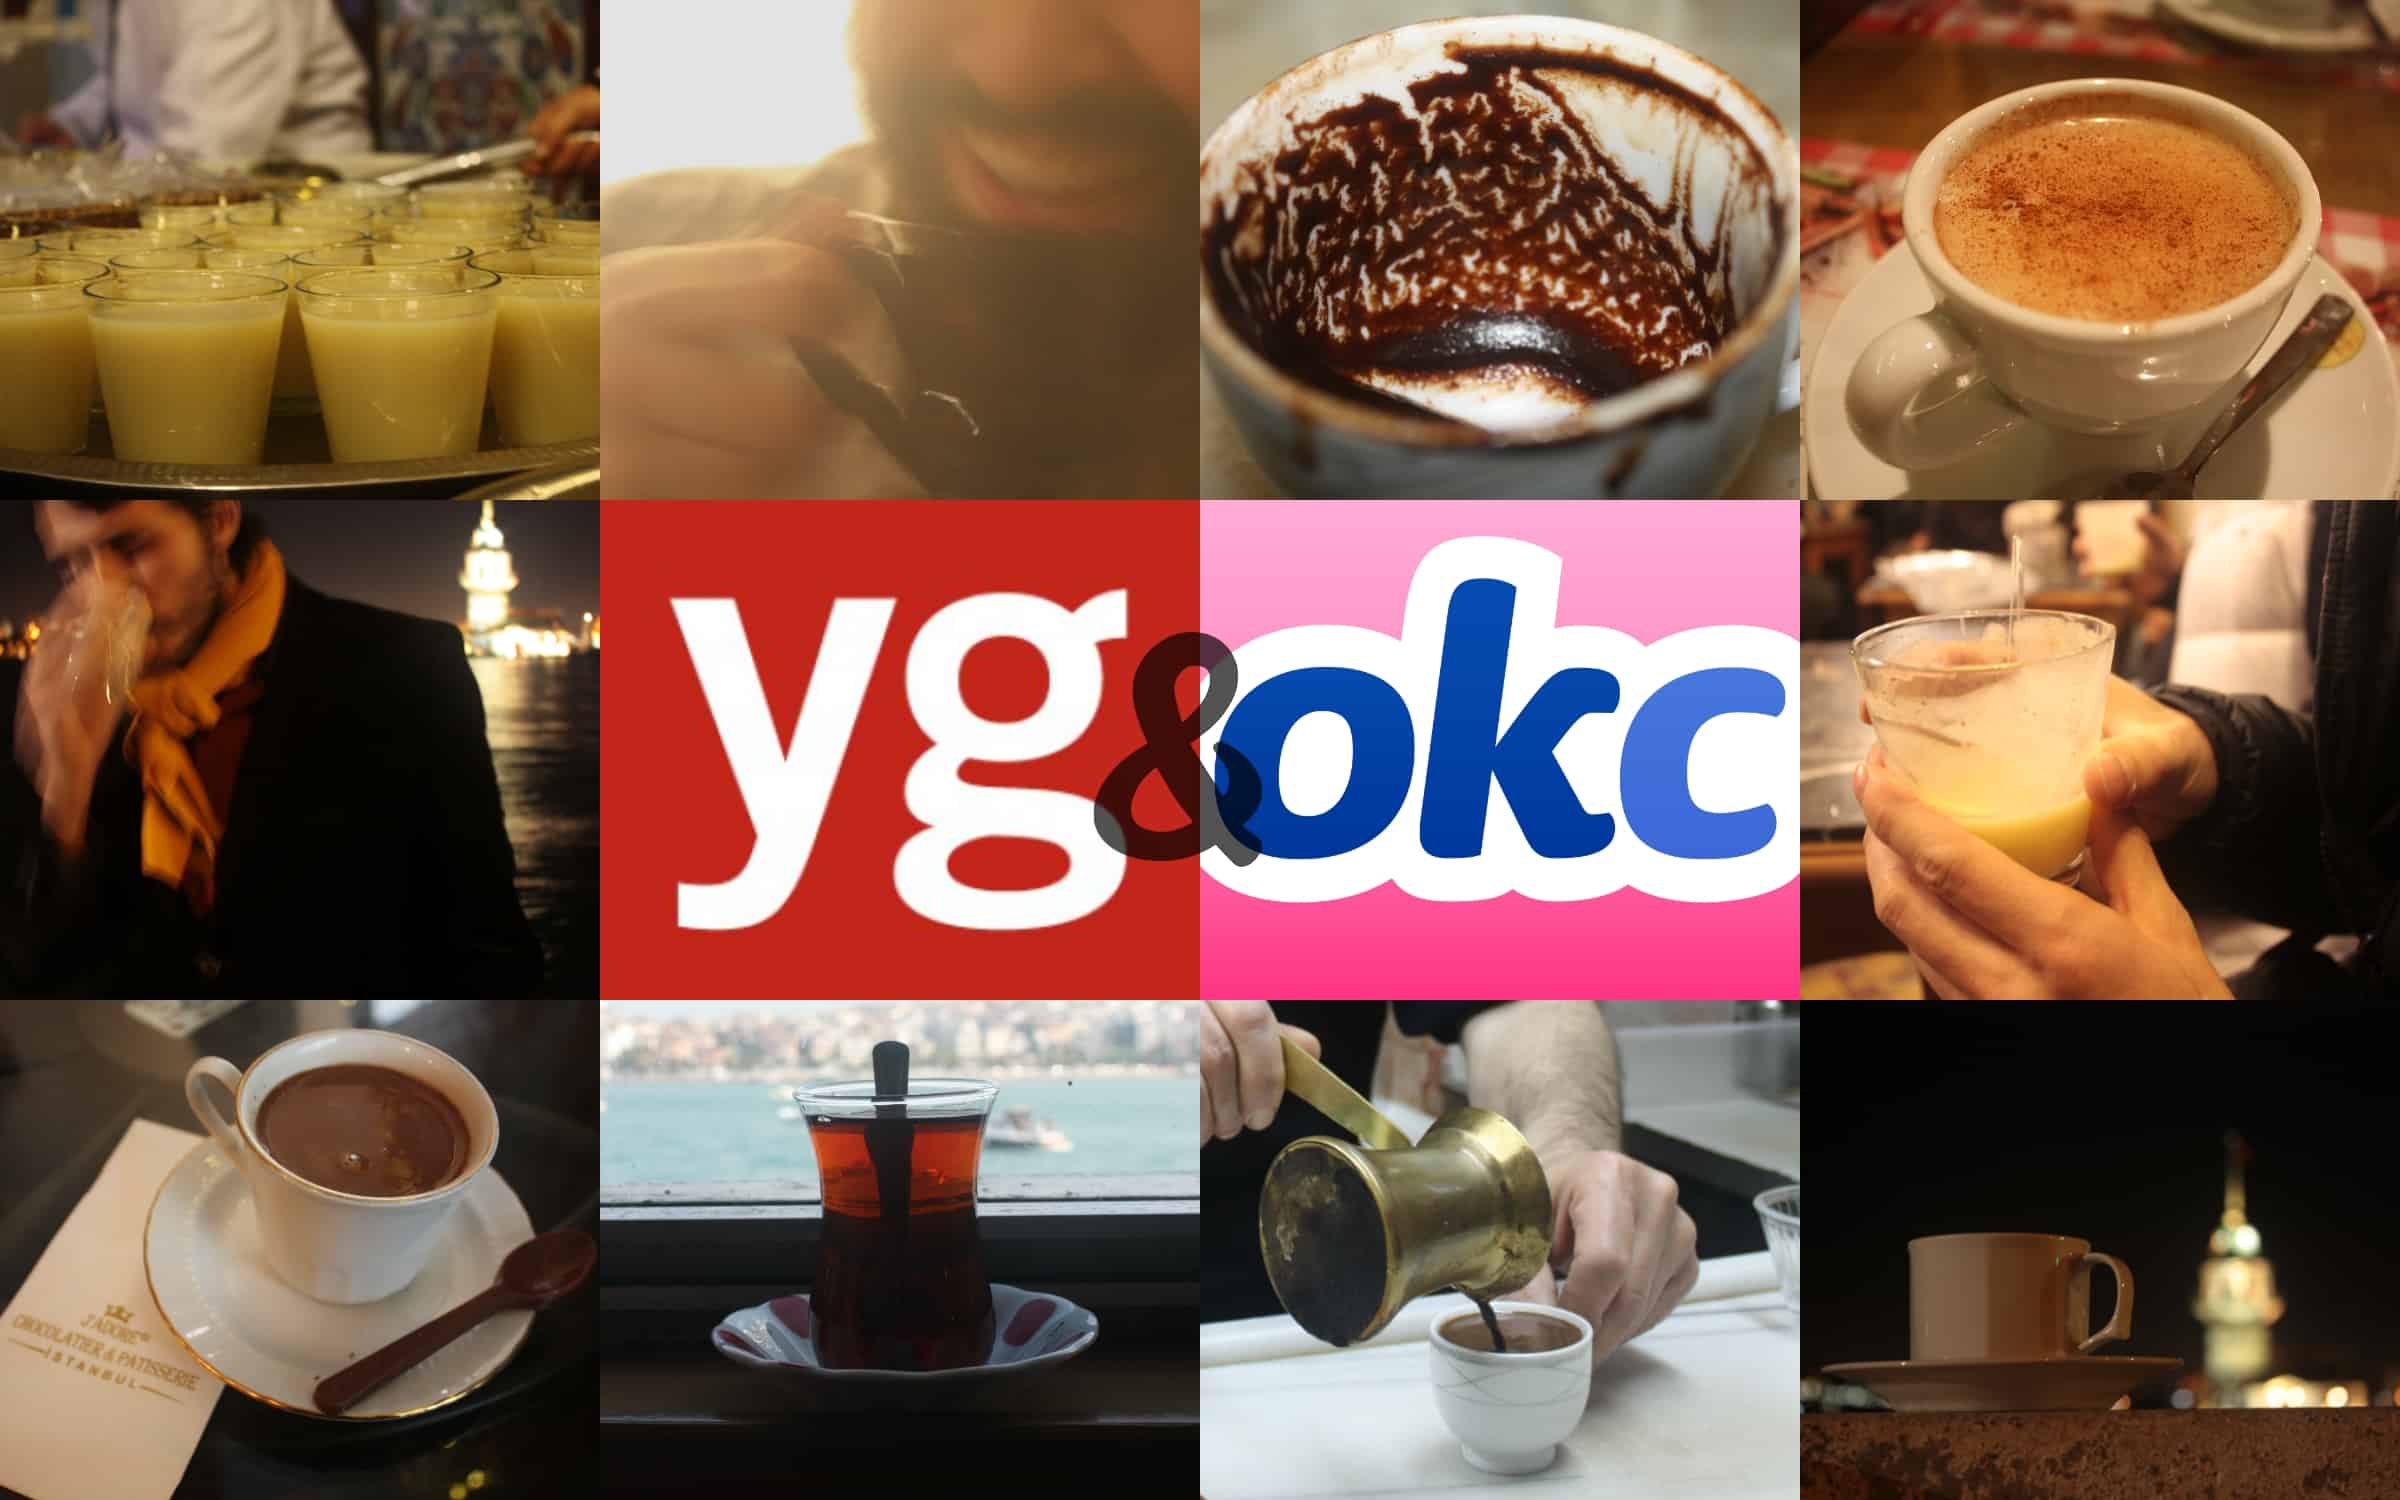 Çays & Guys (Part 1): Exploring winter drinks and online dating in Istanbul